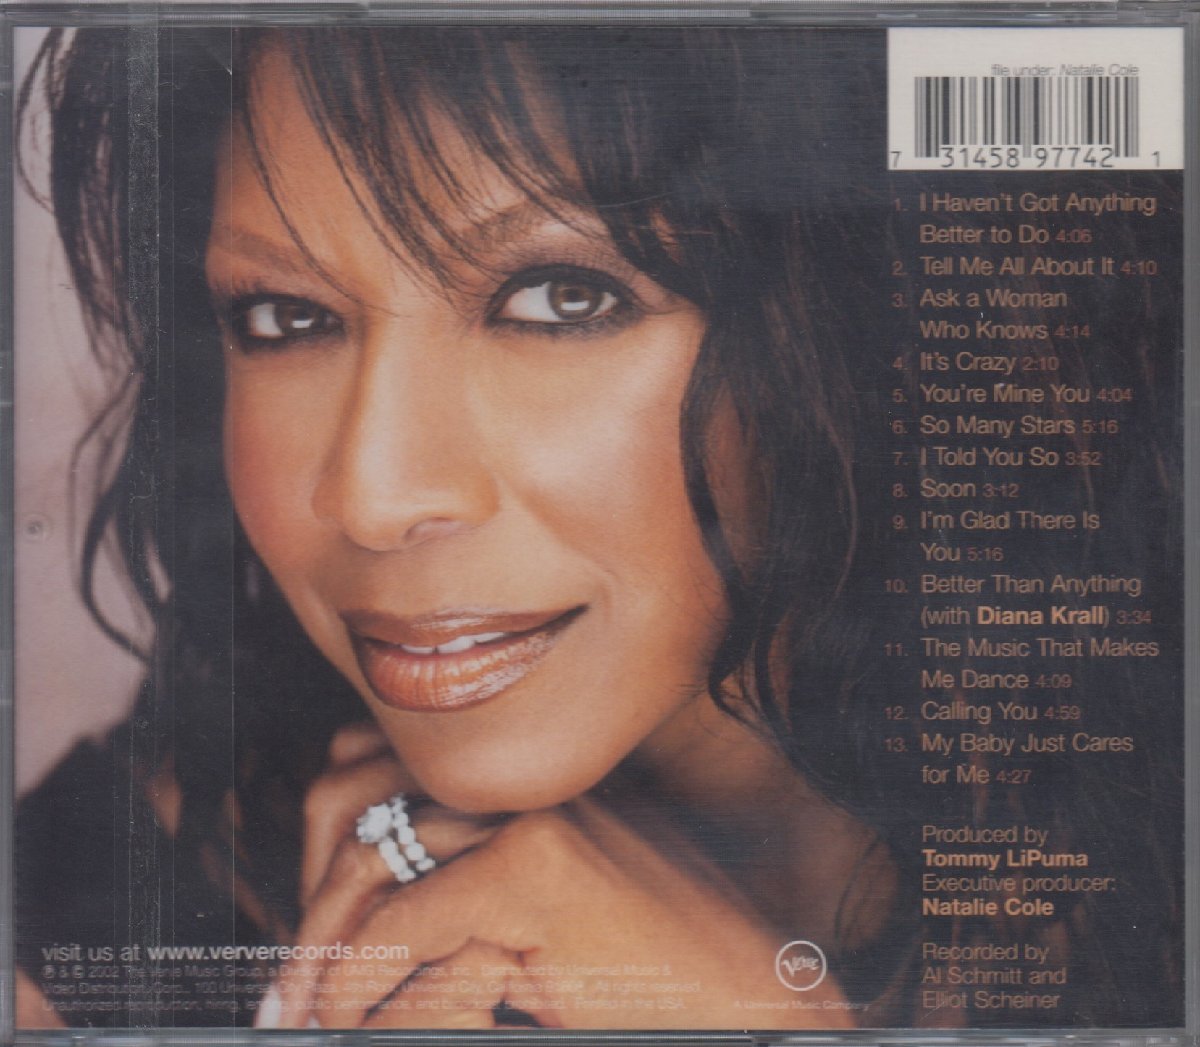 Natalie Cole ナタリー・コール / Ask A Woman Who Knows ★中古輸入盤 /314589774-2/240126の画像2